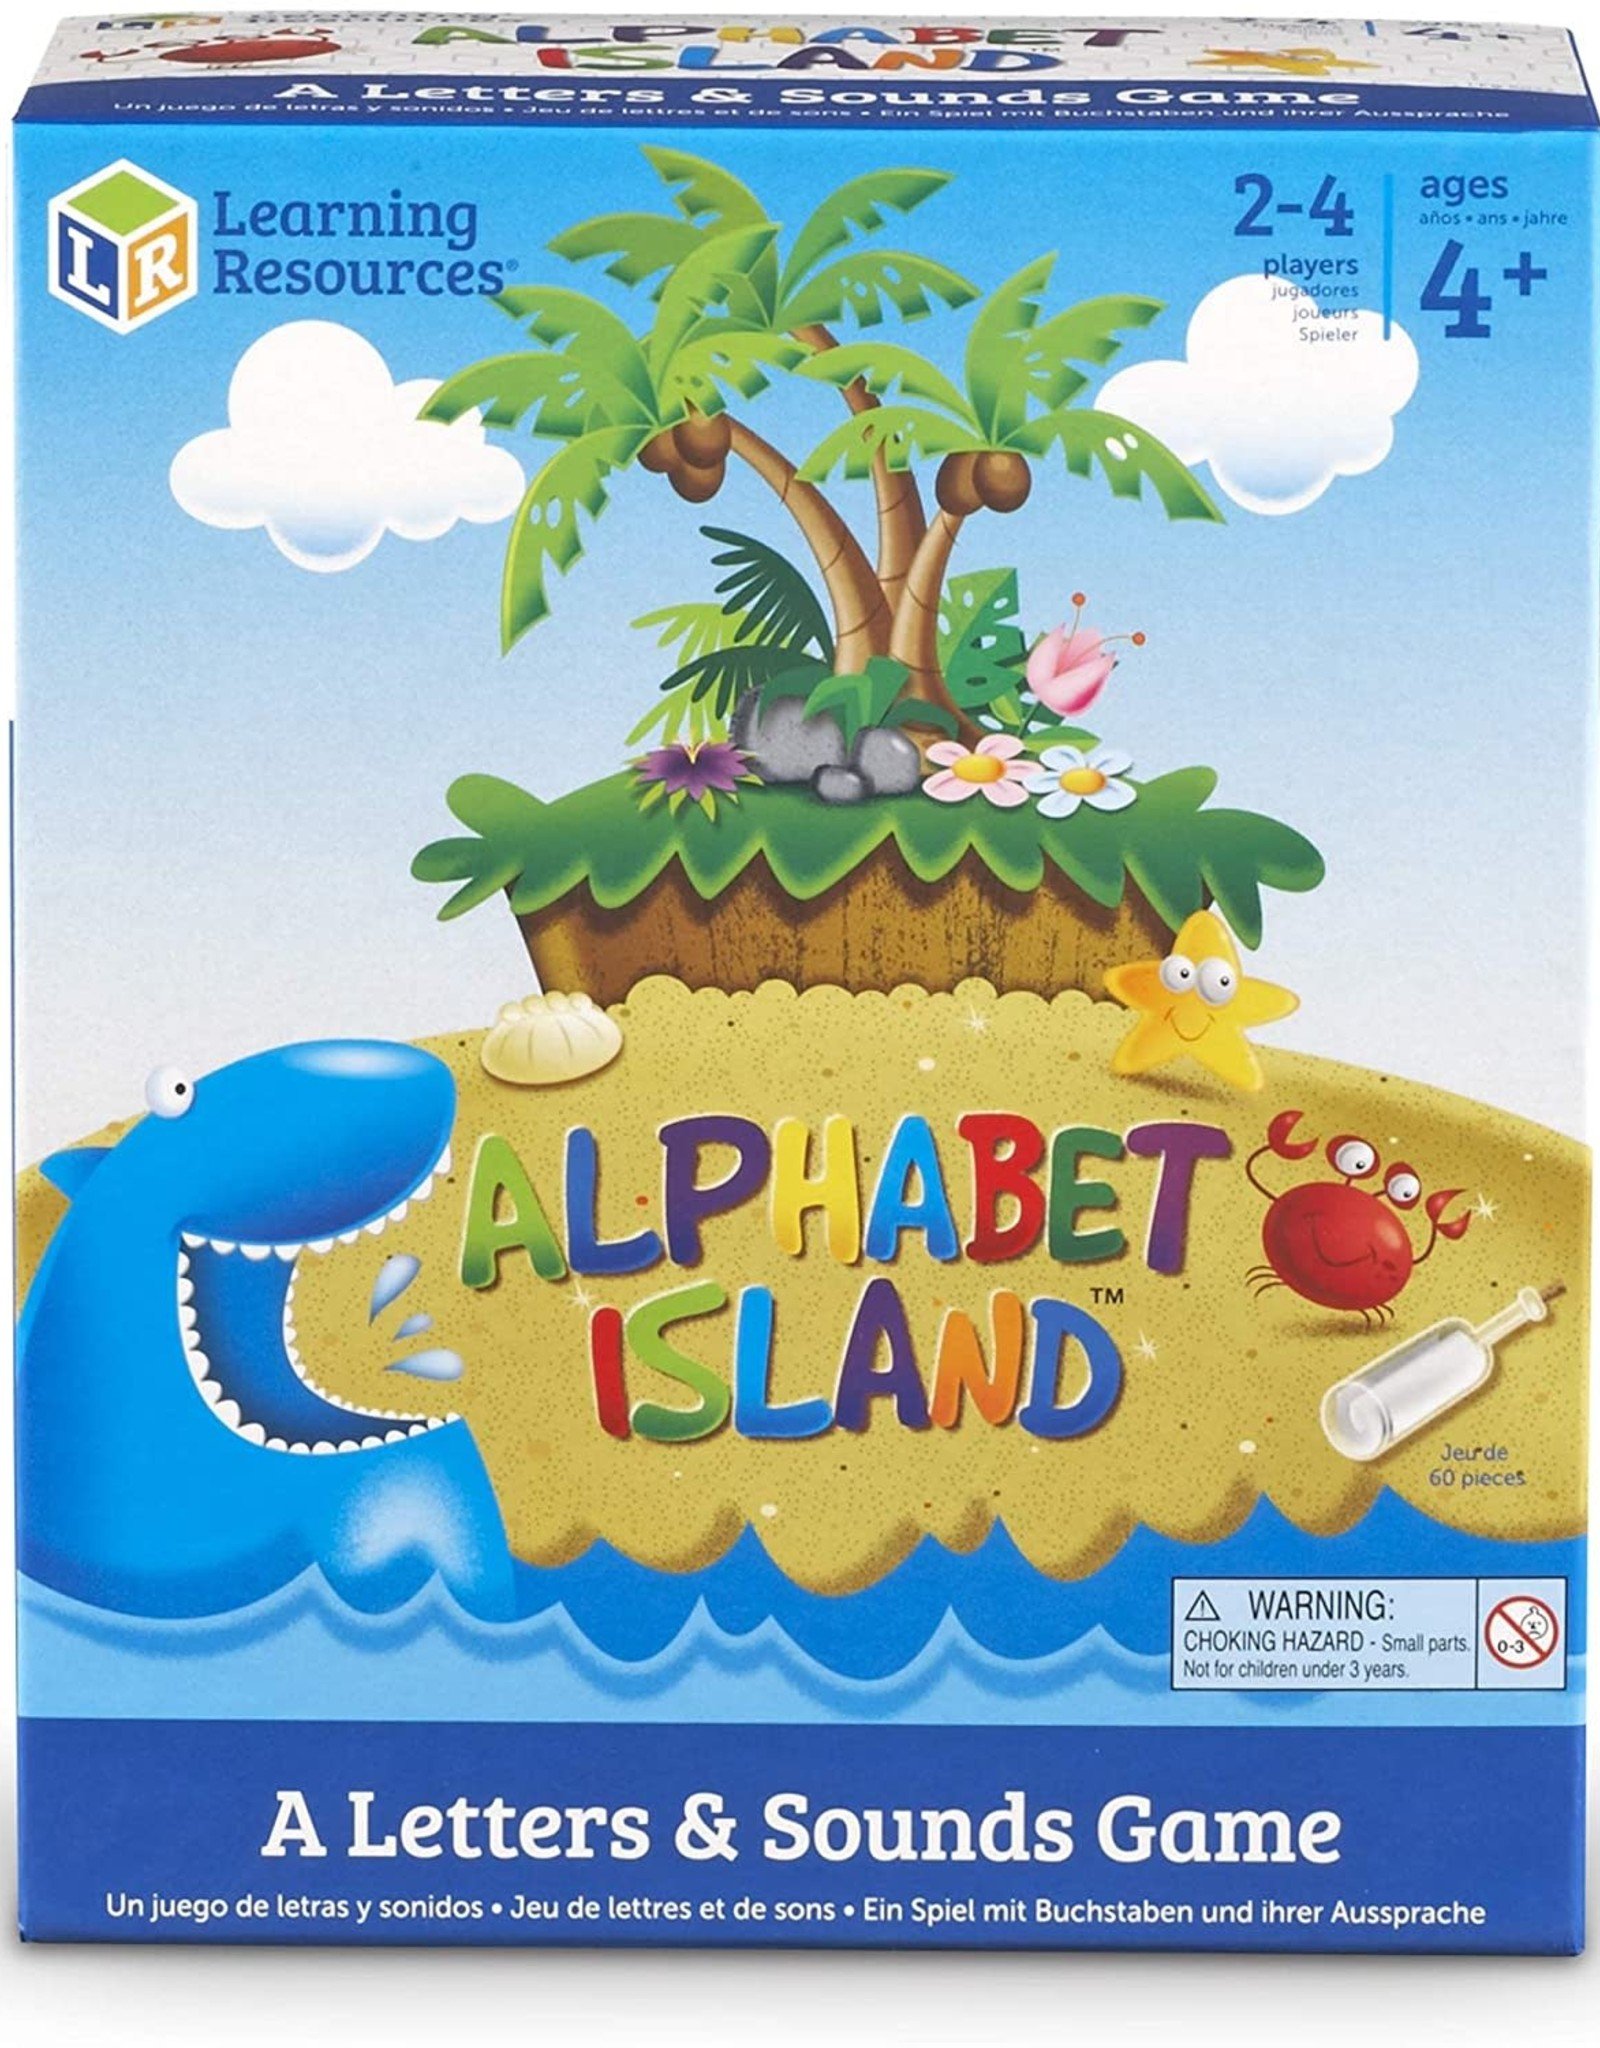 Learning Resources Alphabet Island Letters & Sounds Game